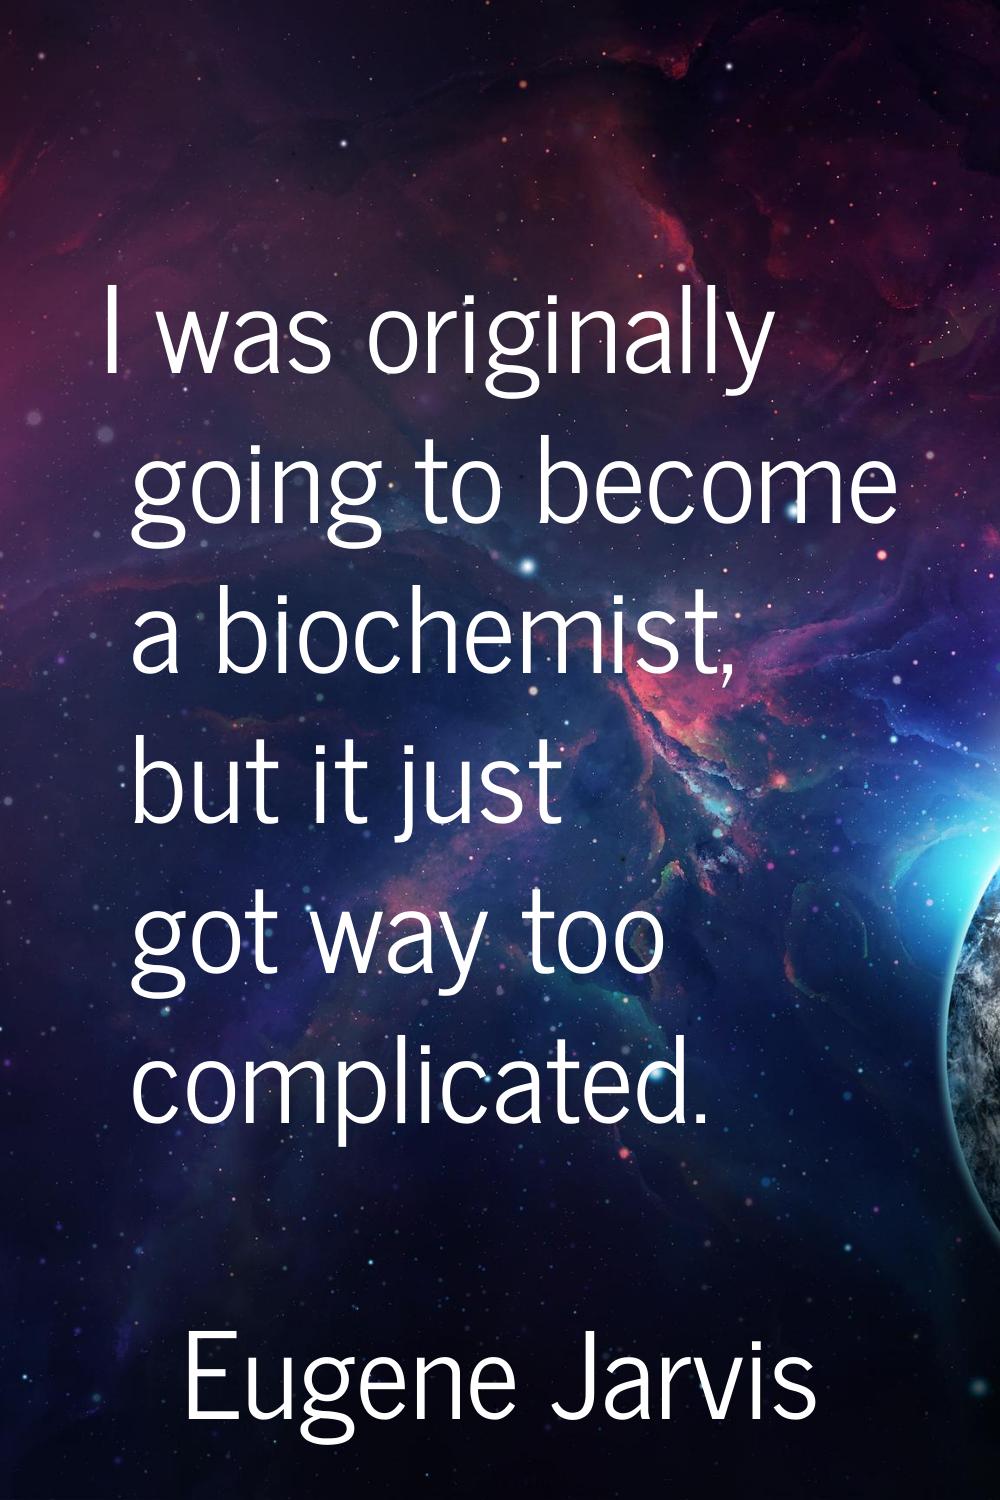 I was originally going to become a biochemist, but it just got way too complicated.